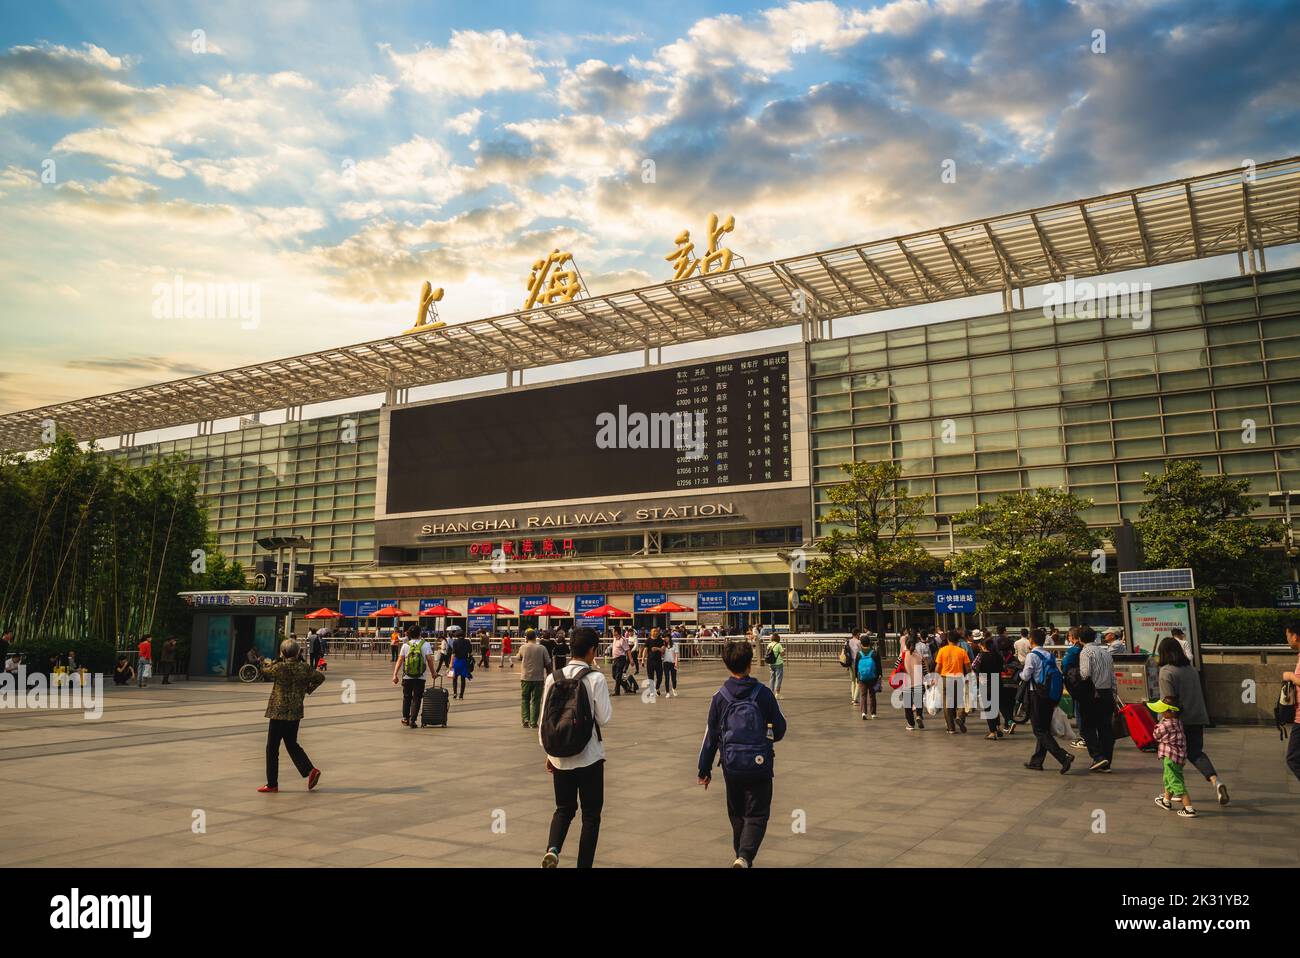 May 11, 2019: Shanghai railway station, located on Moling Road, is one of the four major railway stations in Shanghai, China. It was opened in 1987 an Stock Photo